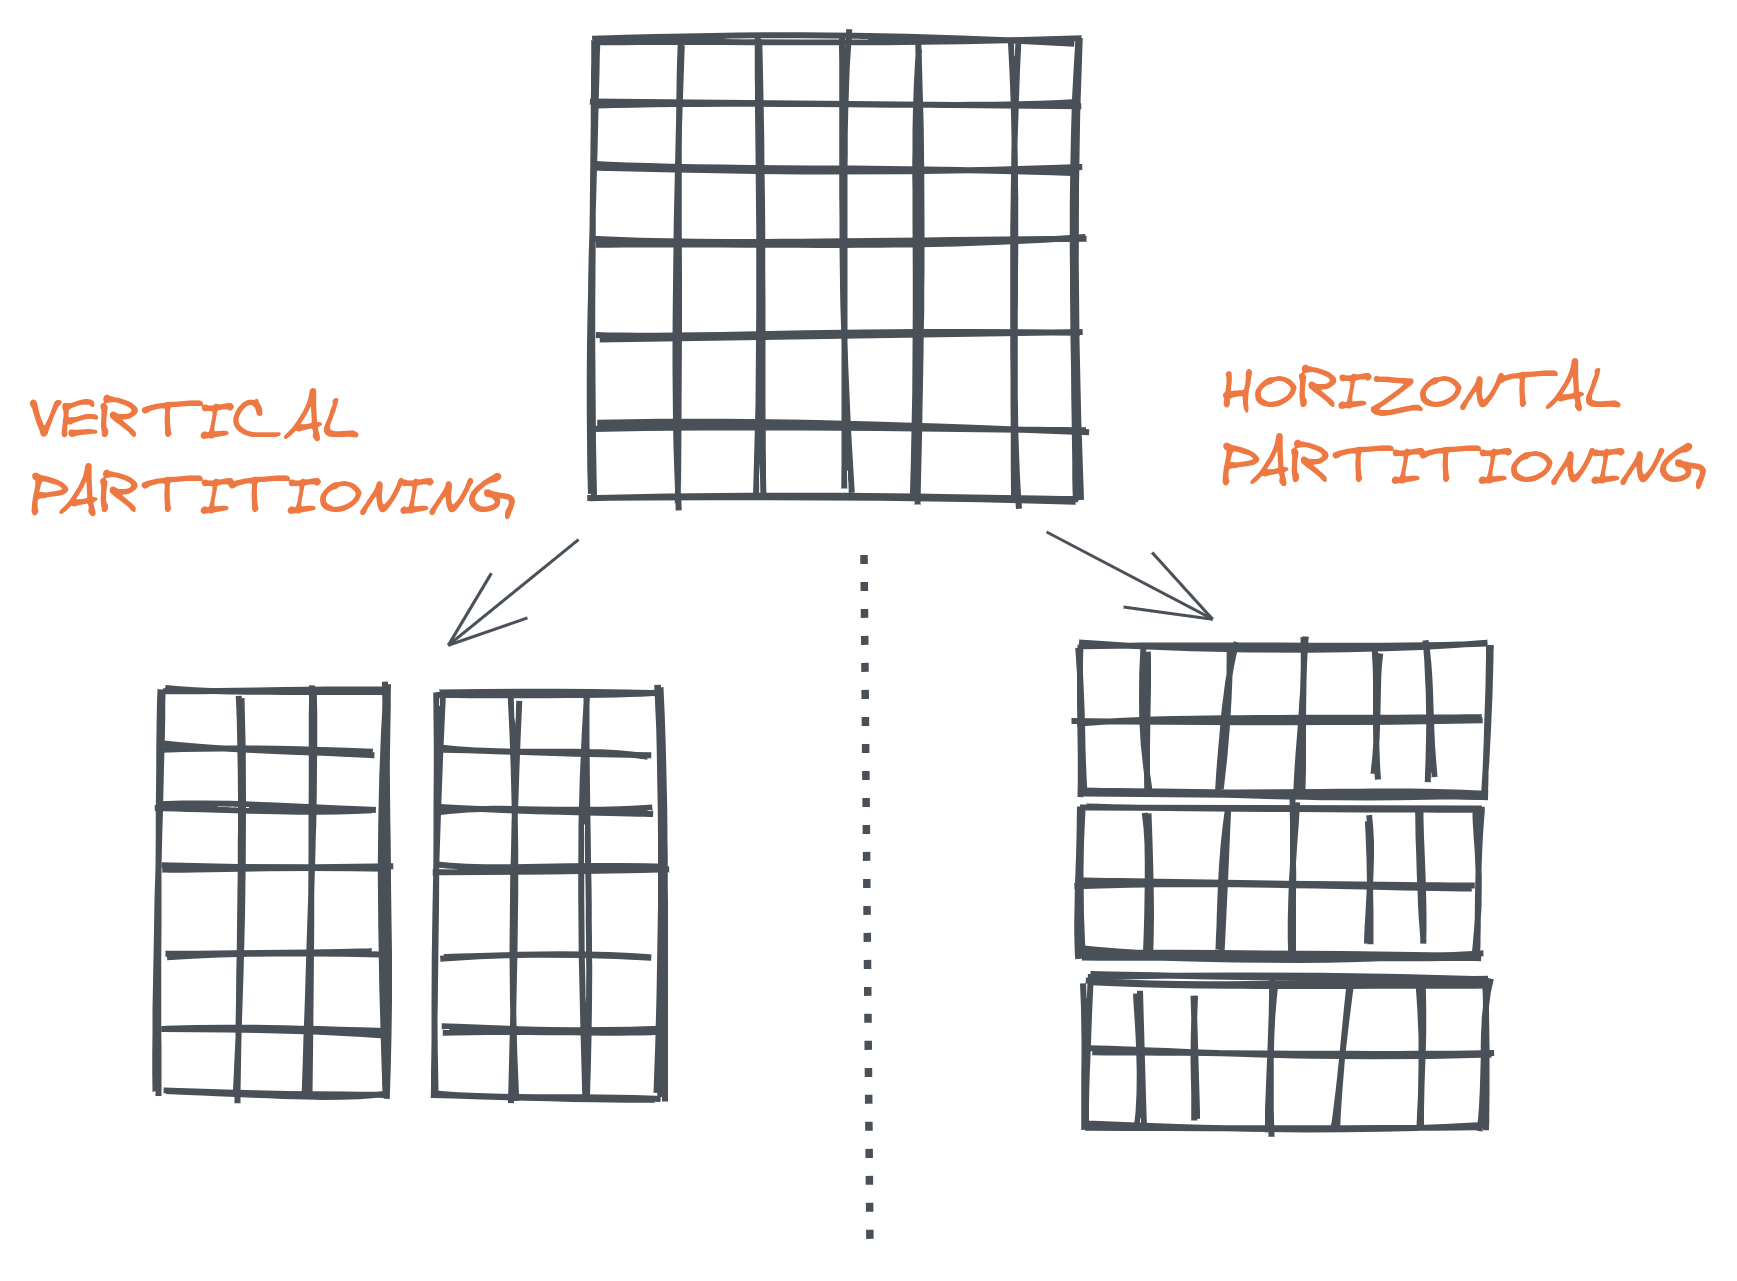 Types of partitioning